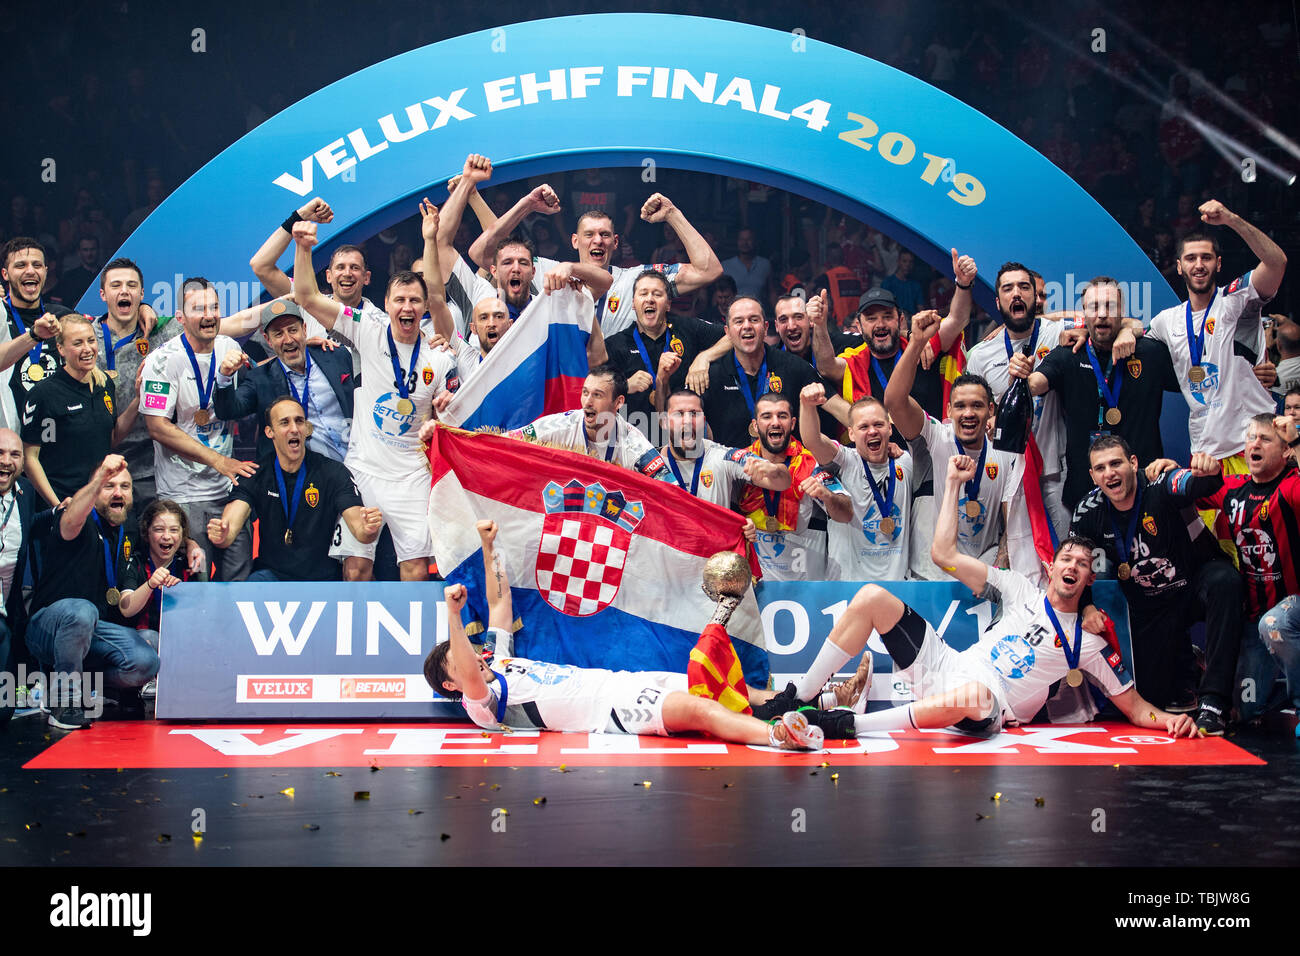 Cologne, Germany. 02nd June, 2019. Handball: Champions League, Vardar  Skopje - Telekom Veszprem, Final Round, Final Four, Final. The team of  Vardar can be photographed for the official winner photo. Credit: Marius